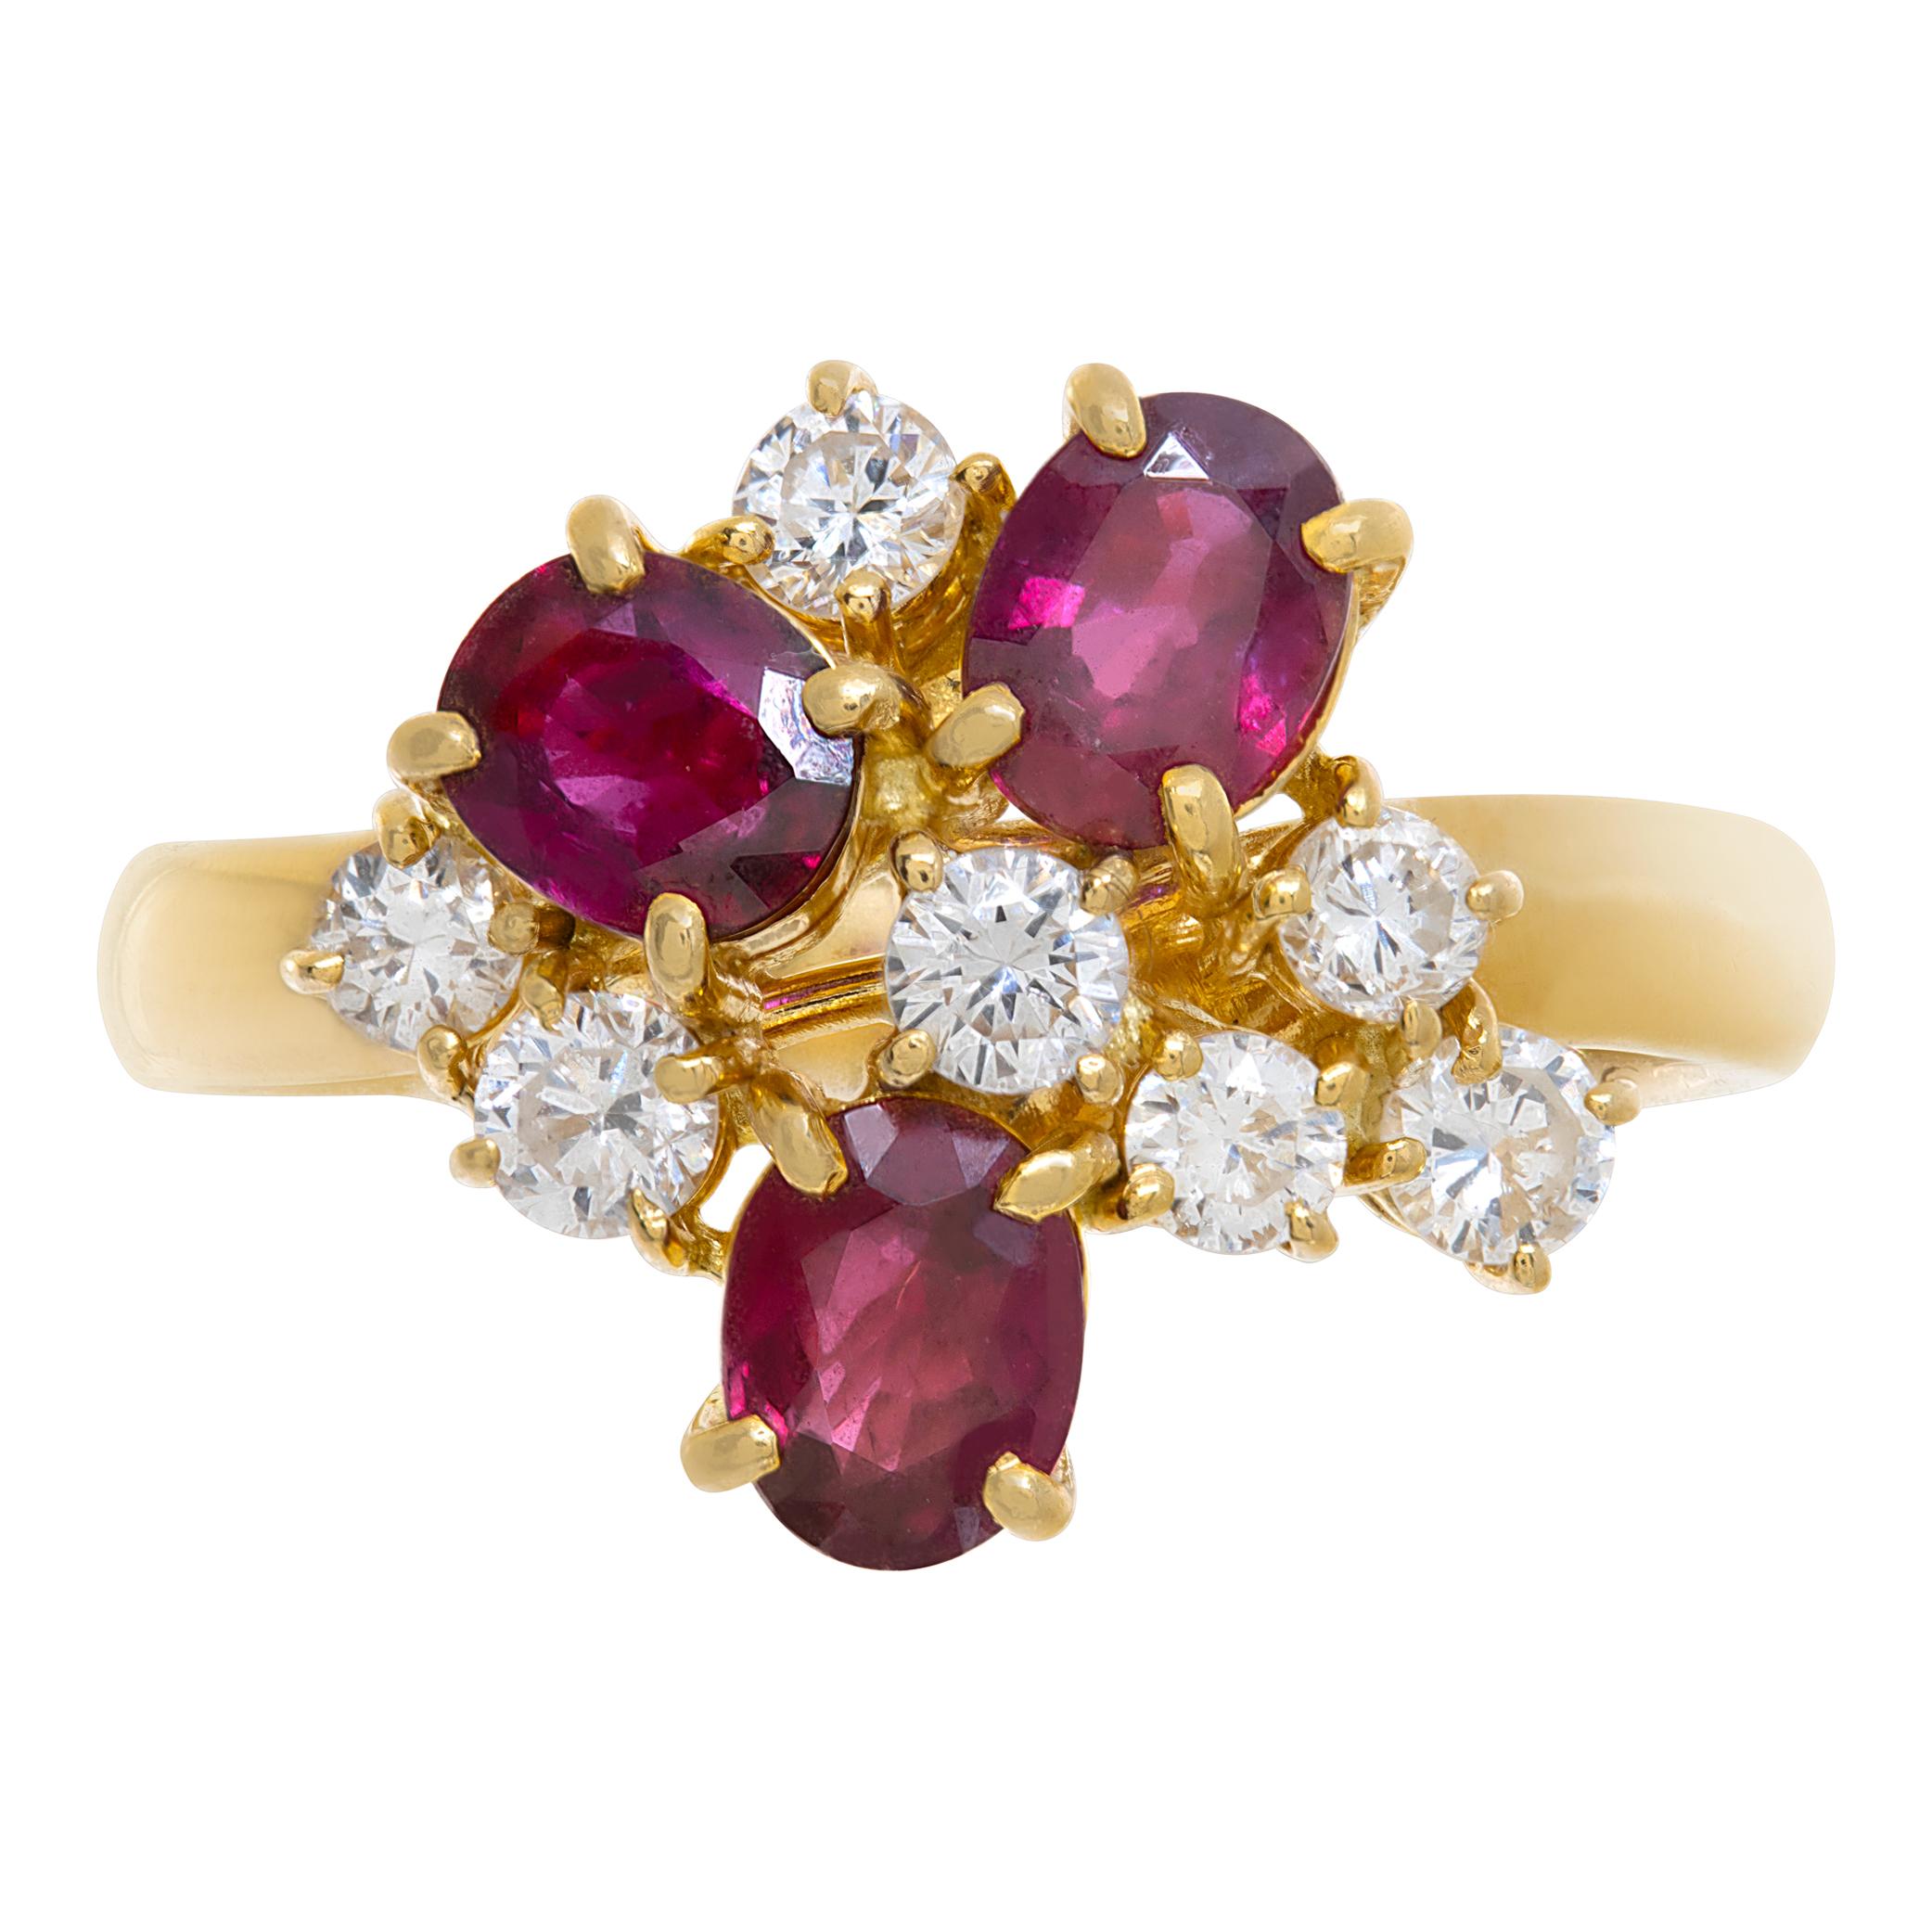 Ruby & diamond cluster ring in 18k yellow gold with approximately 1/2 carat in oval rubies & 1/2 carat in round brilliant cut diamonds. Size 7.

This Diamond/Ruby ring is currently size 0 and some items can be sized up or down, please ask! It weighs